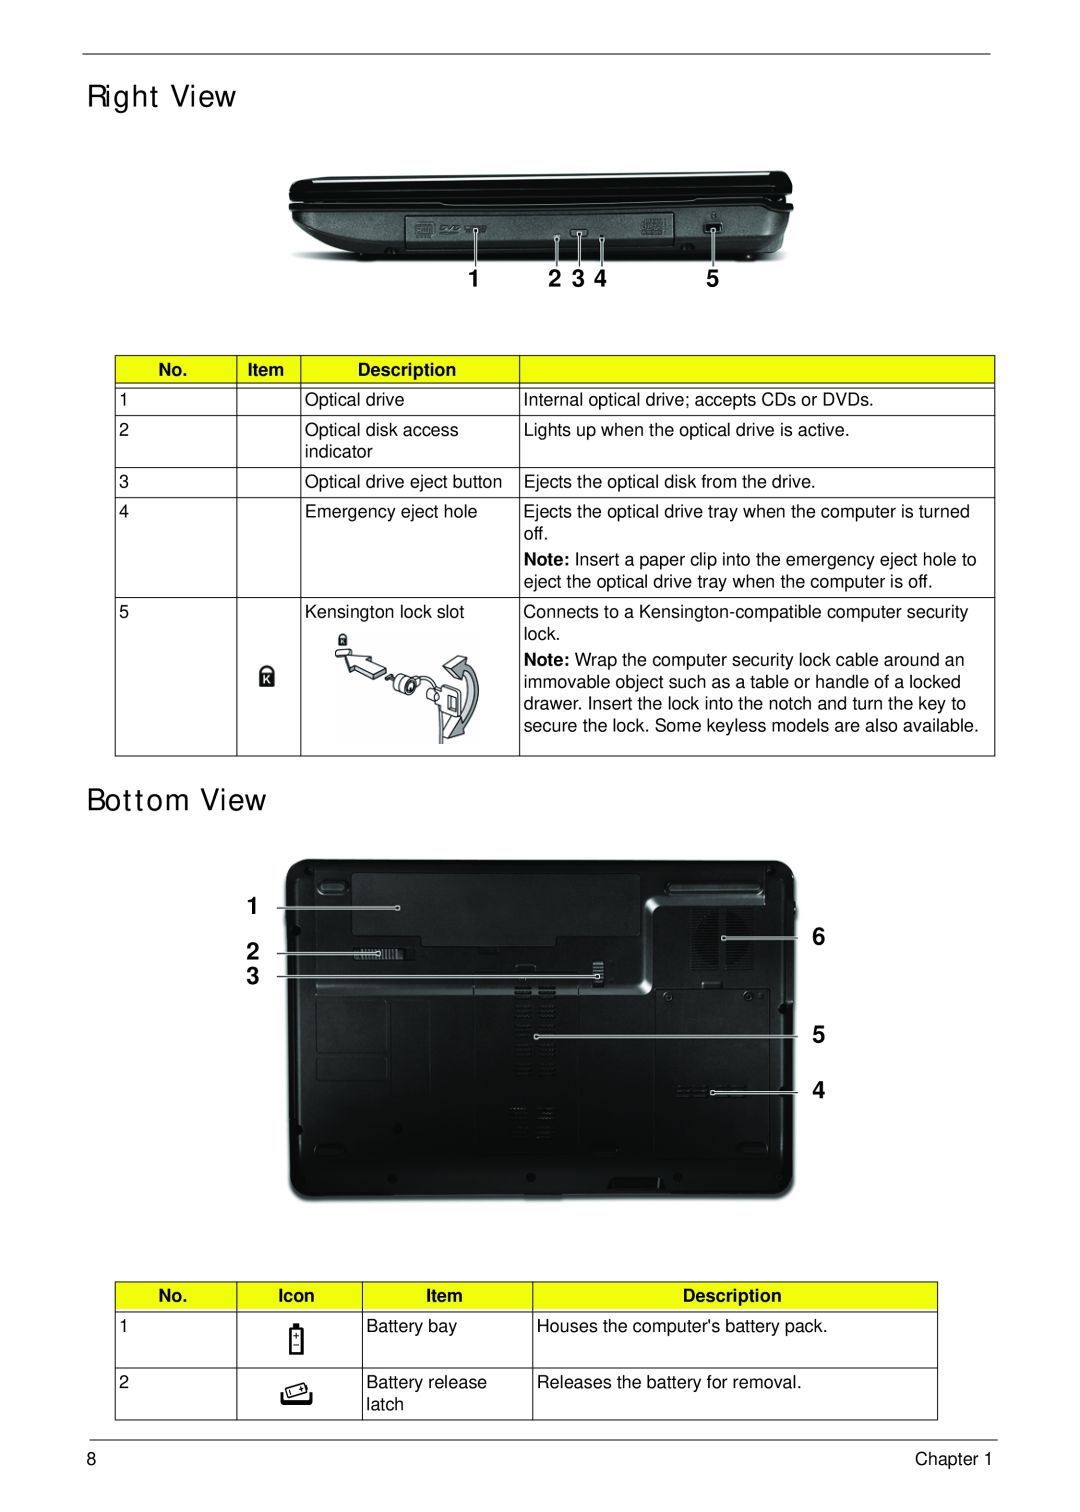 Acer 5532 manual Right View, Bottom View, Description, Icon 